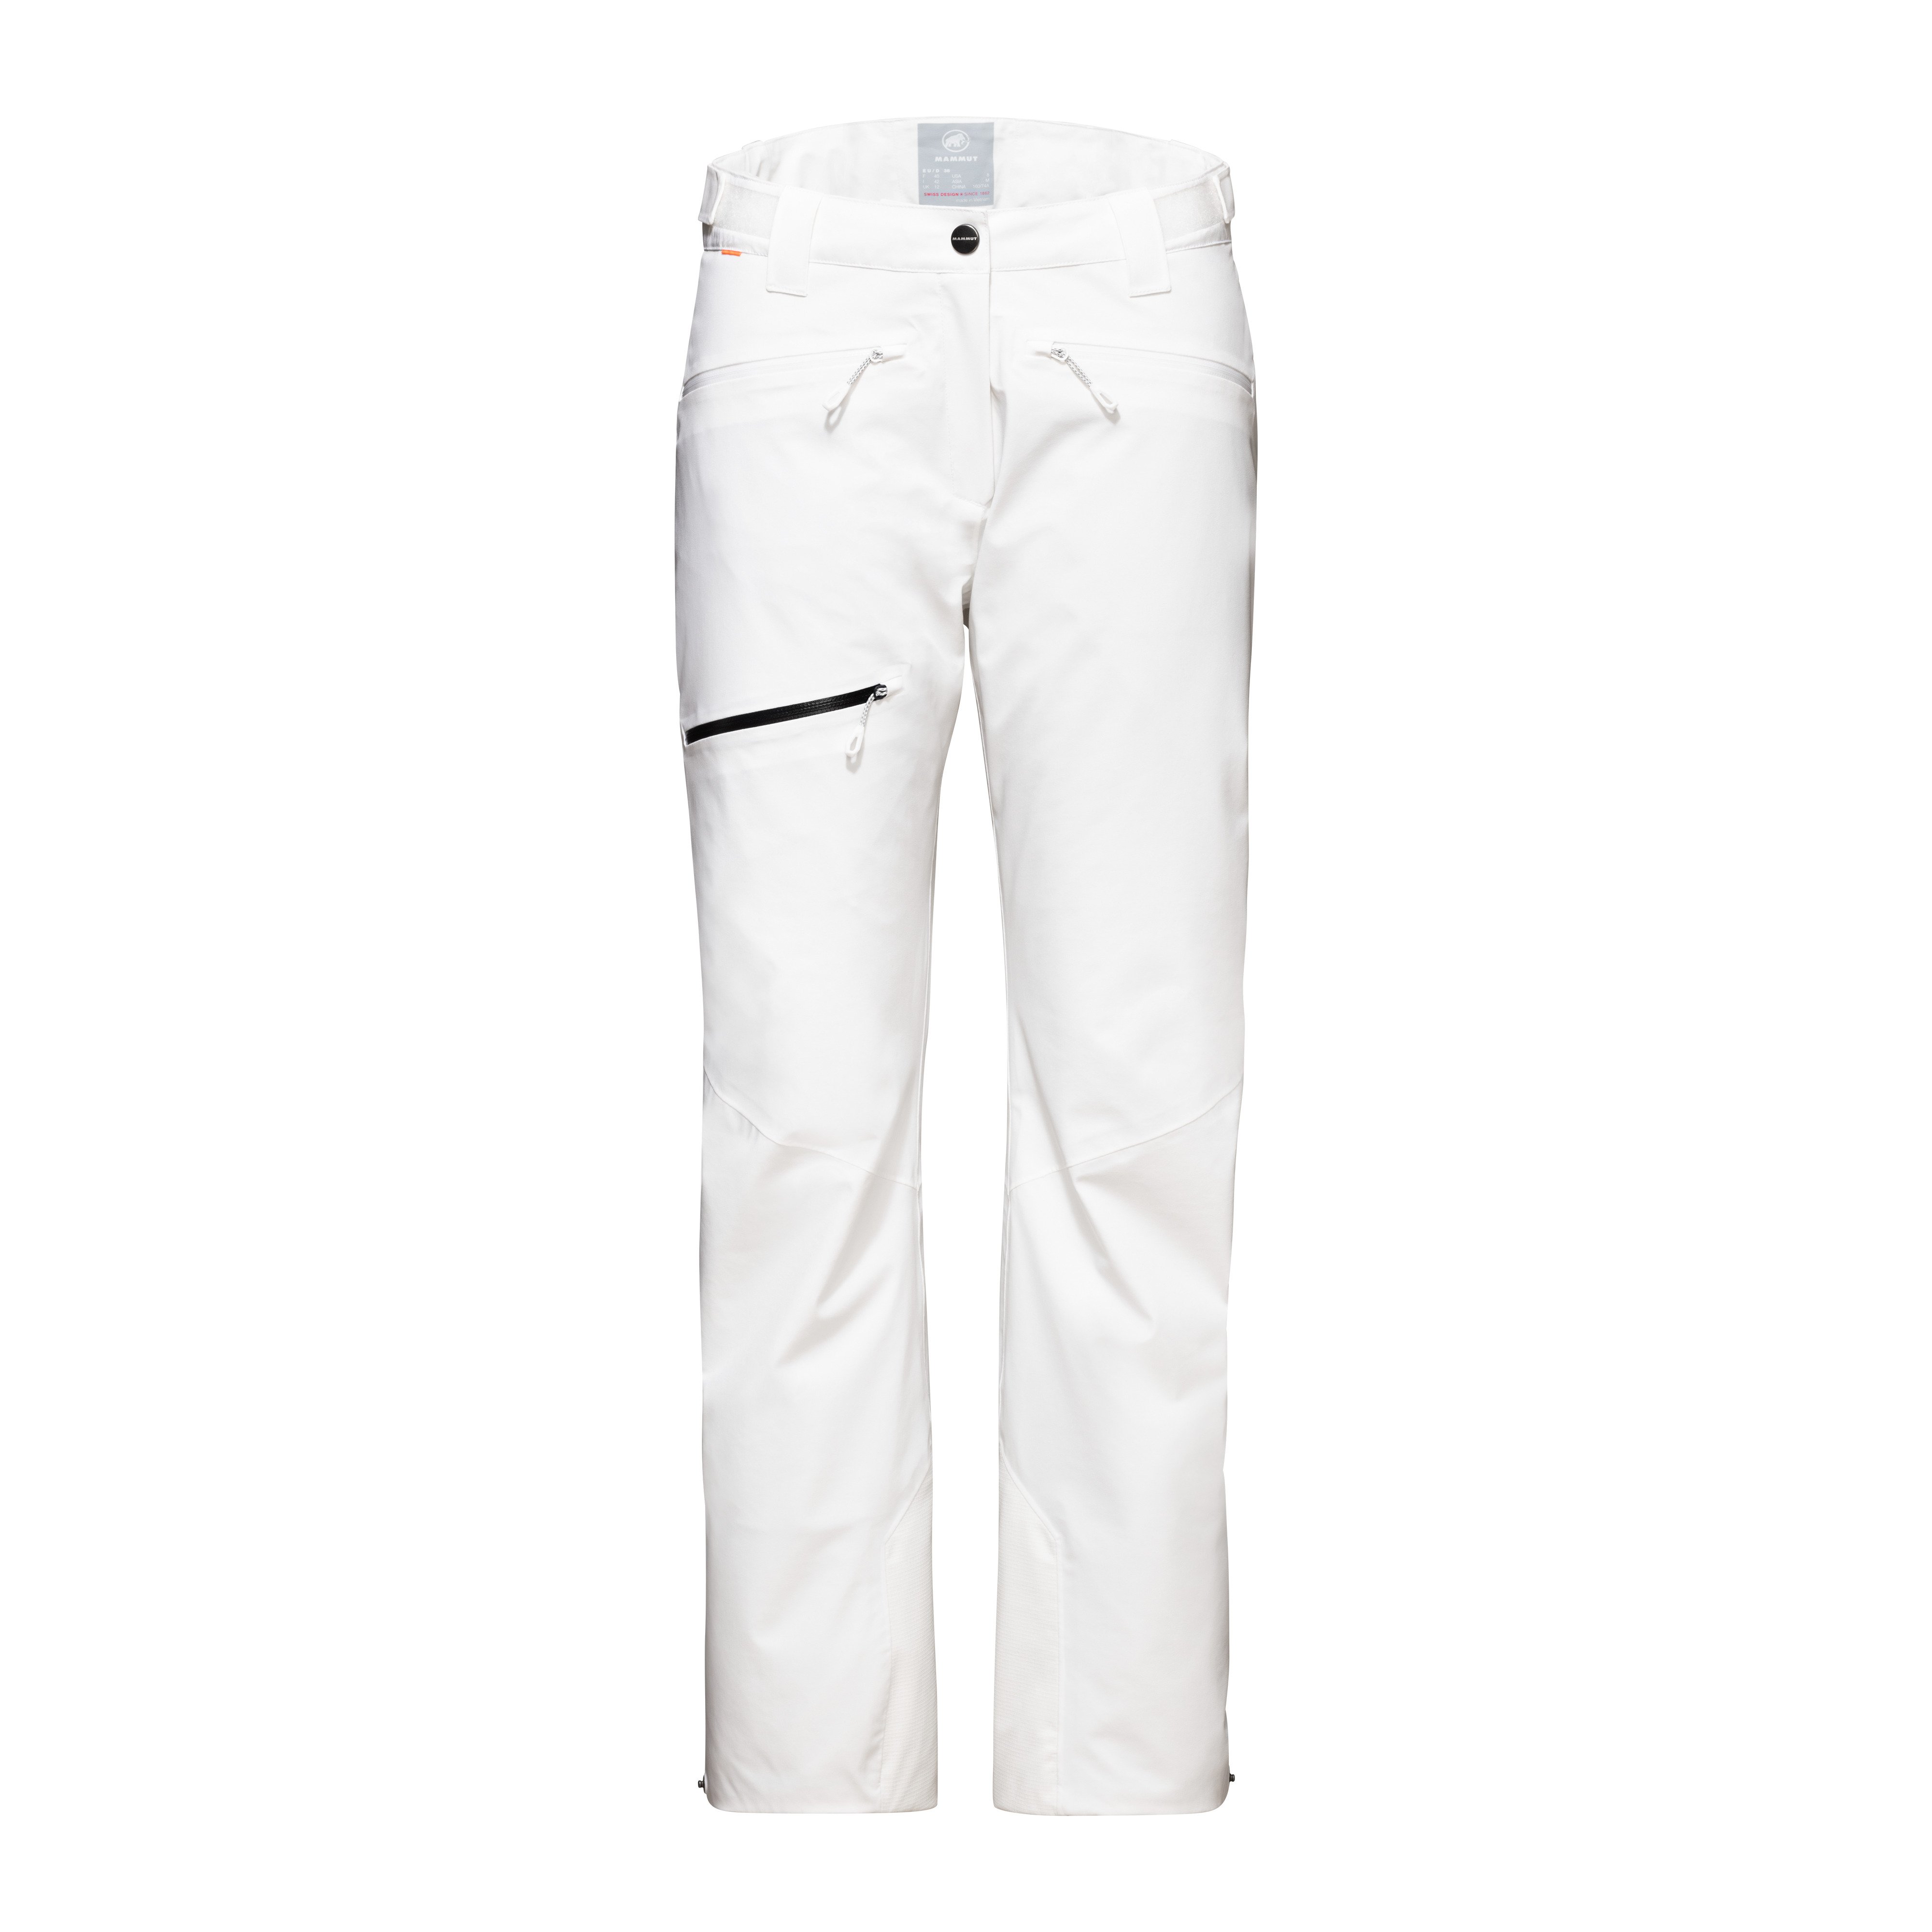 Stoney HS Thermo Pants Women - white, US 14, normal product image